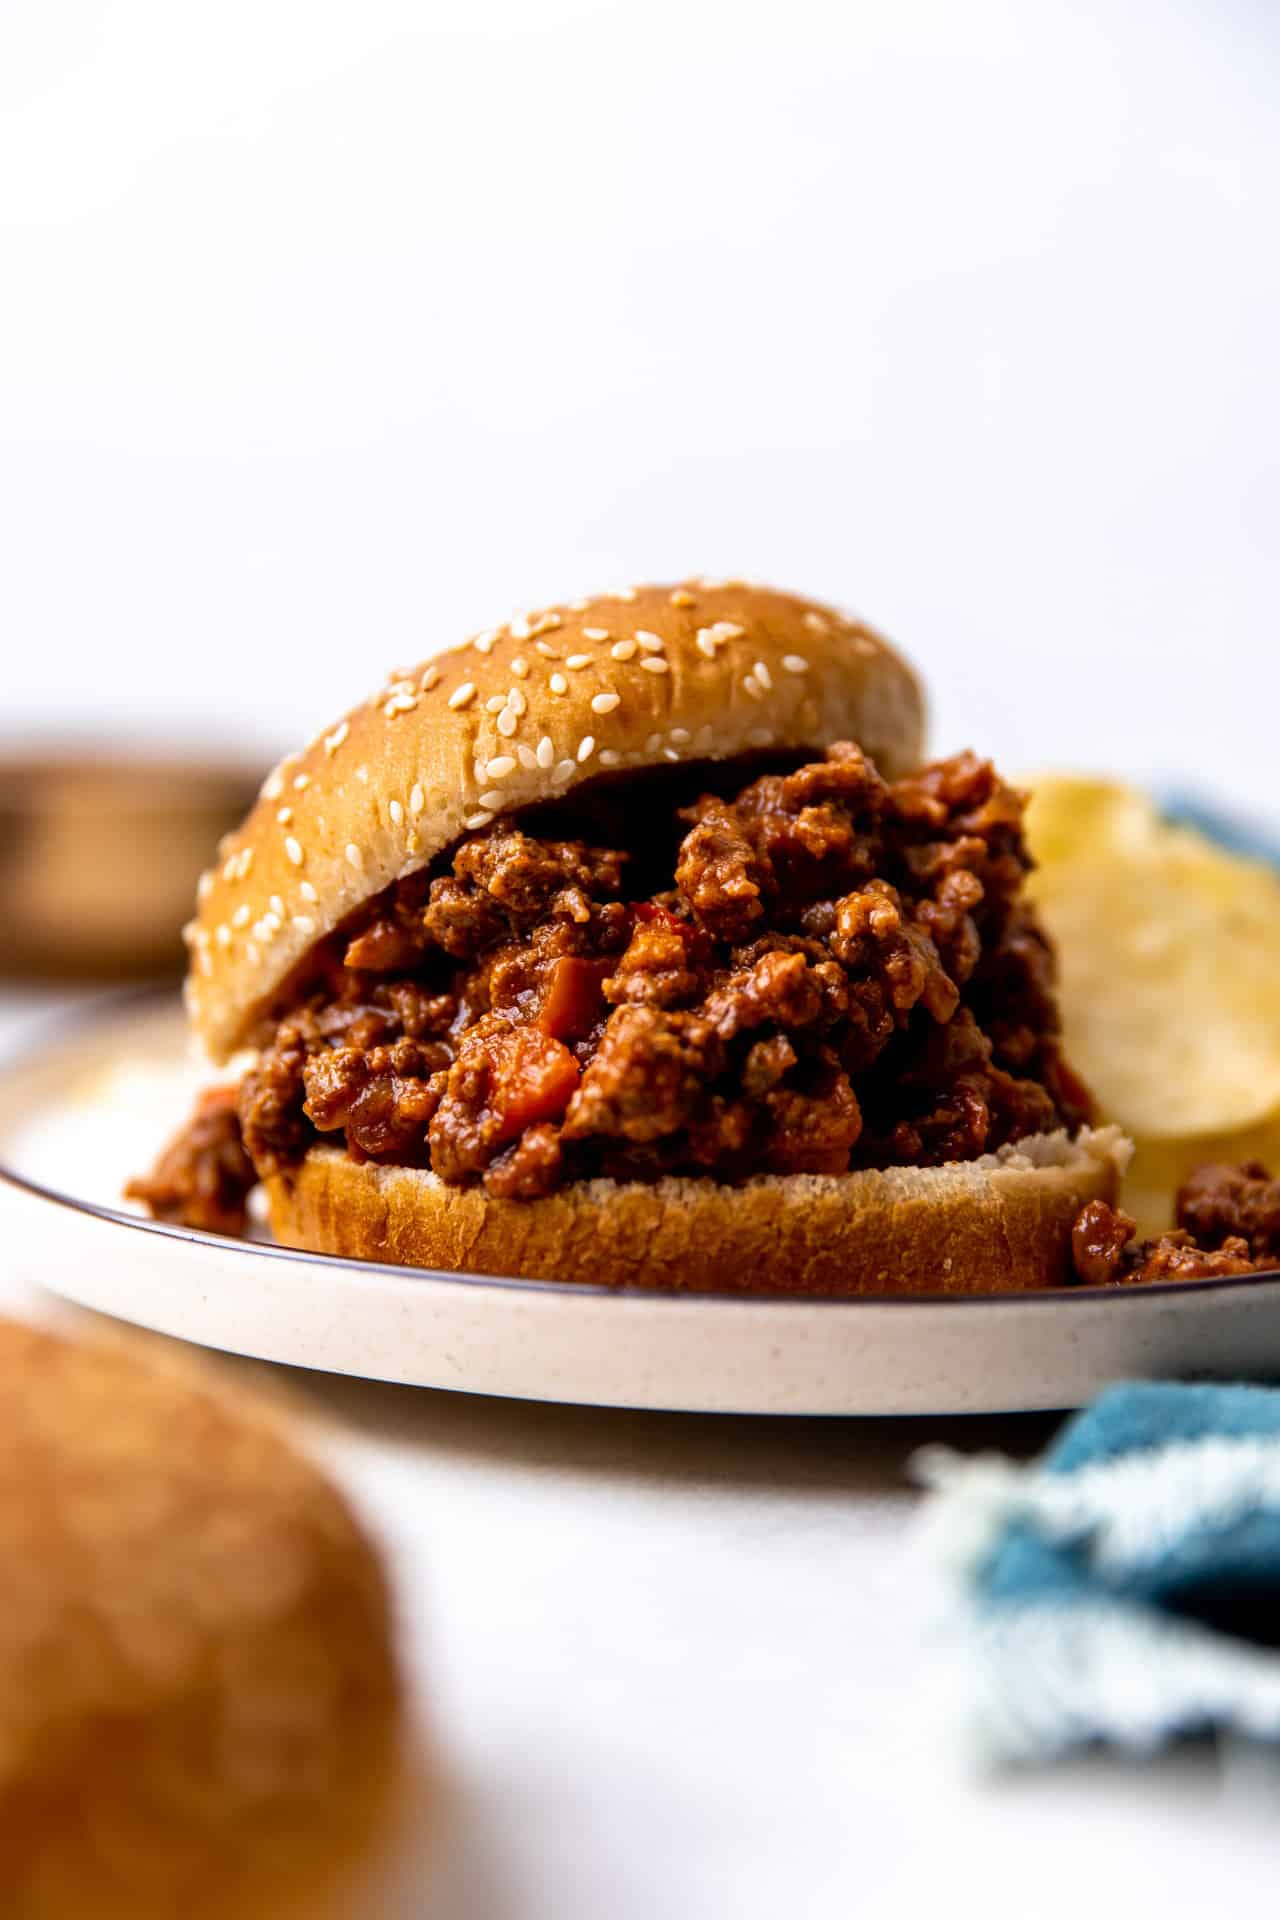 Sloppy Joes with homemade sauce on a hamburger bun served with potato chips.